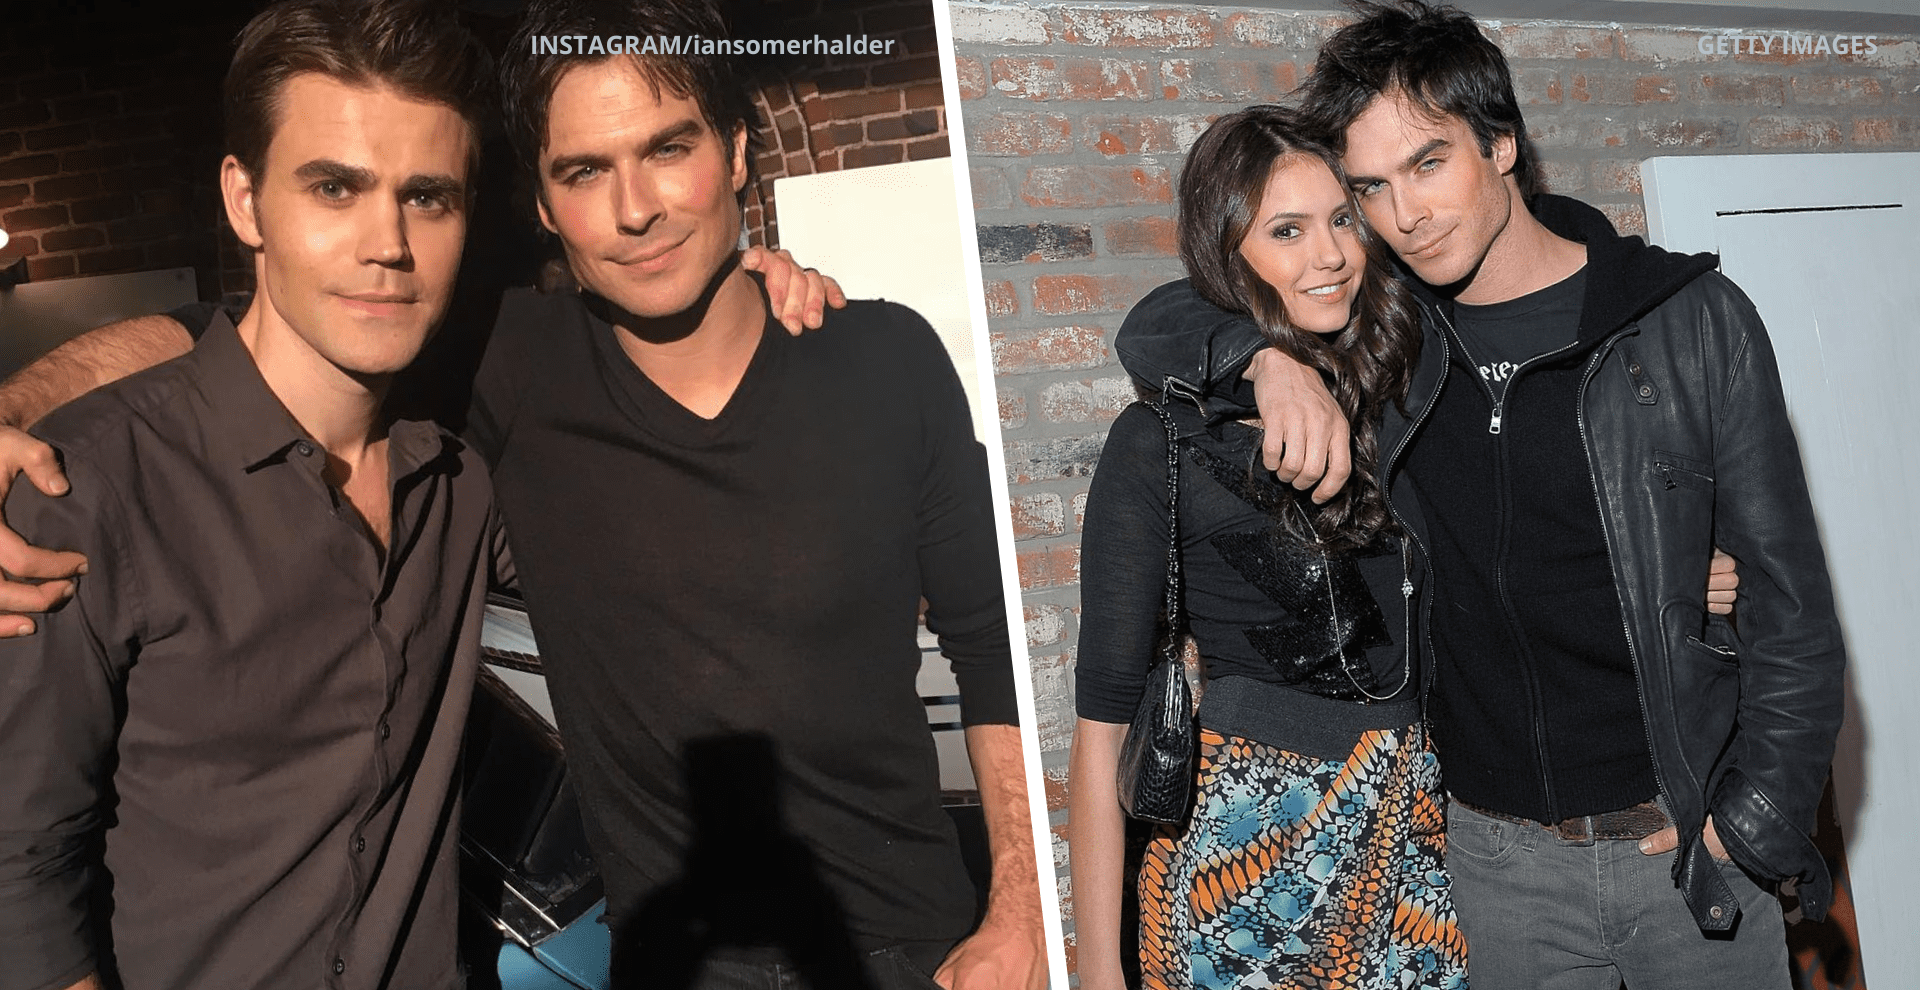 The Vampire Diaries: Cast Relationships in Real Life